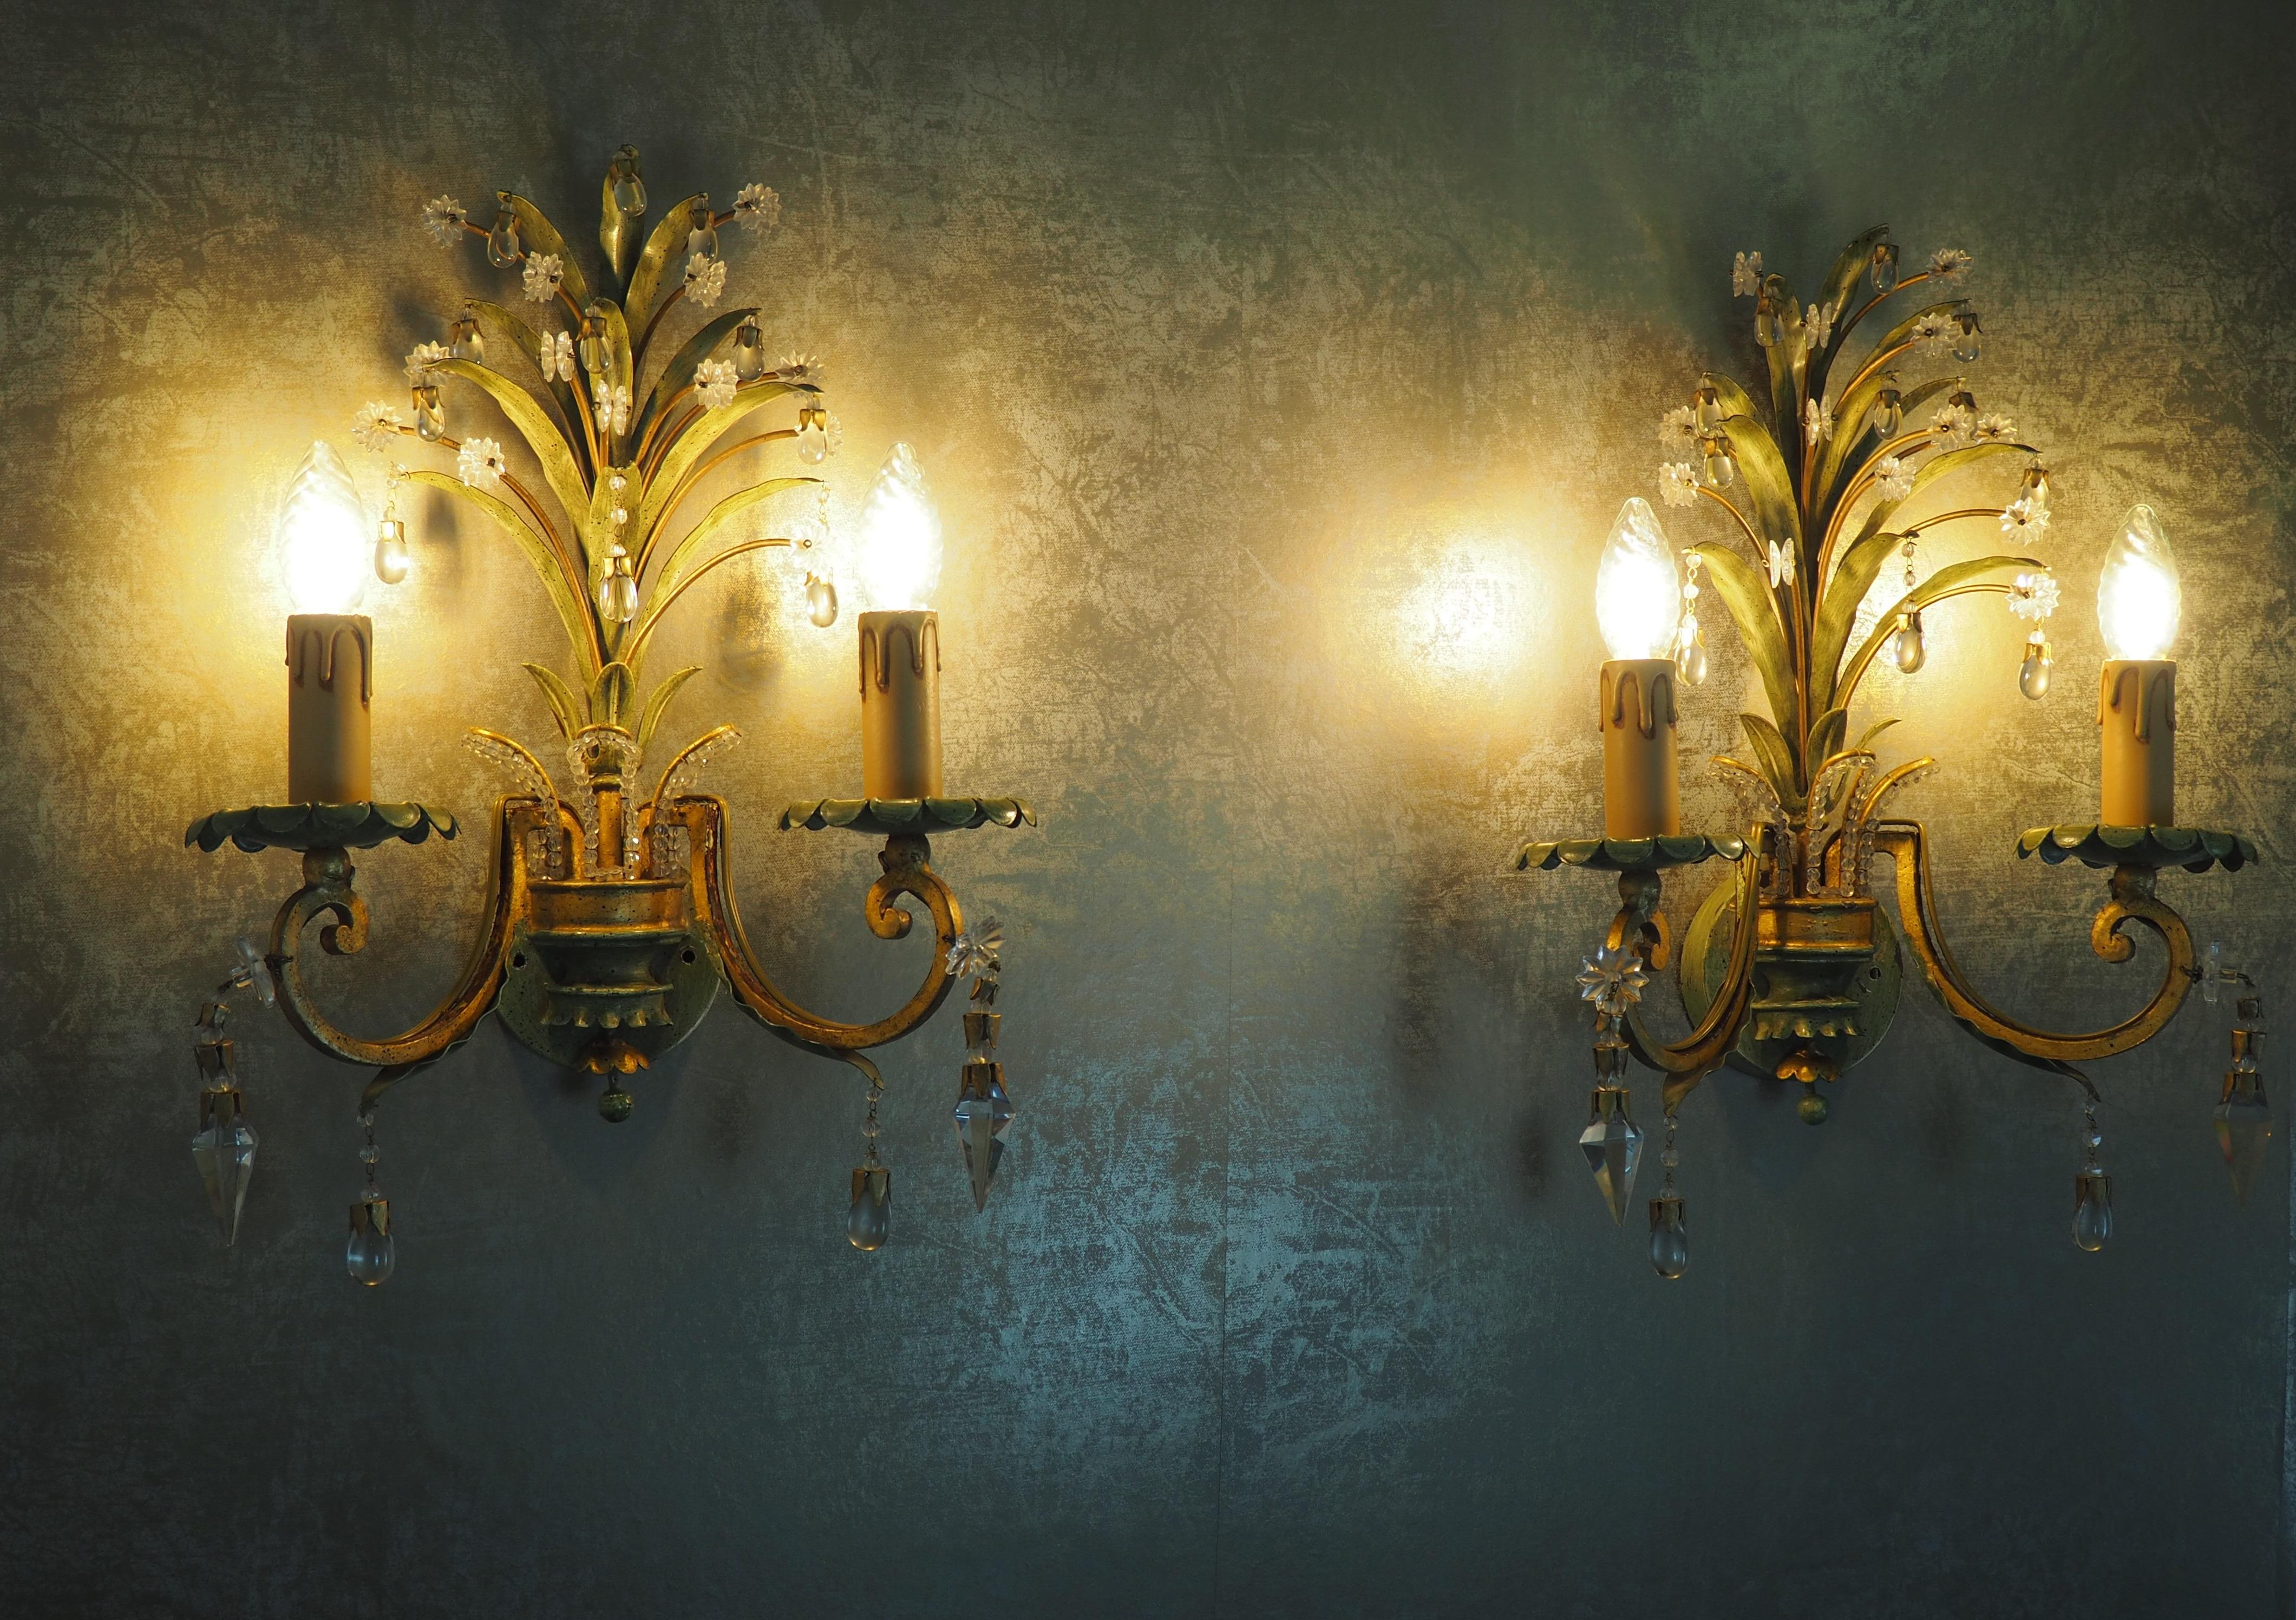 Set of Three Italian Pineapple Light Fixtures by G.Banci, circa 1970s For Sale 3